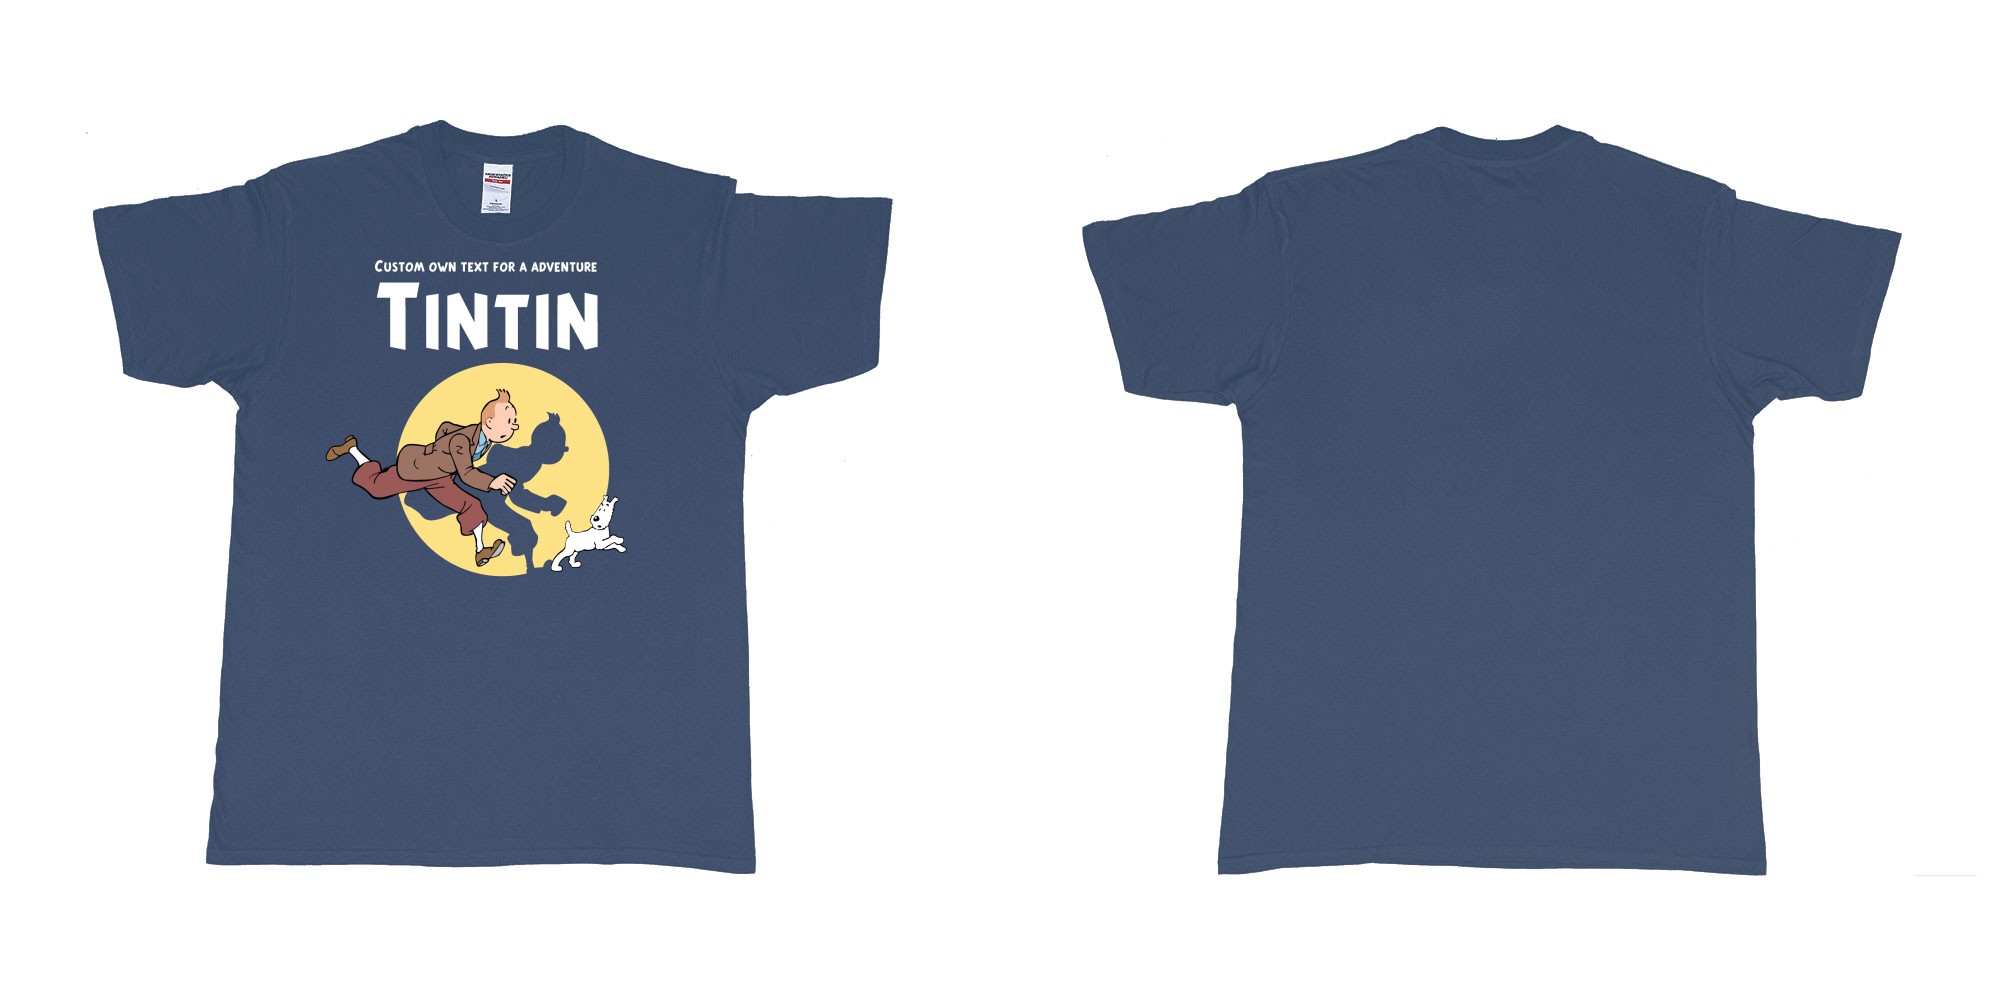 Custom tshirt design tintin custom text for adventure teeshirt printing in fabric color navy choice your own text made in Bali by The Pirate Way